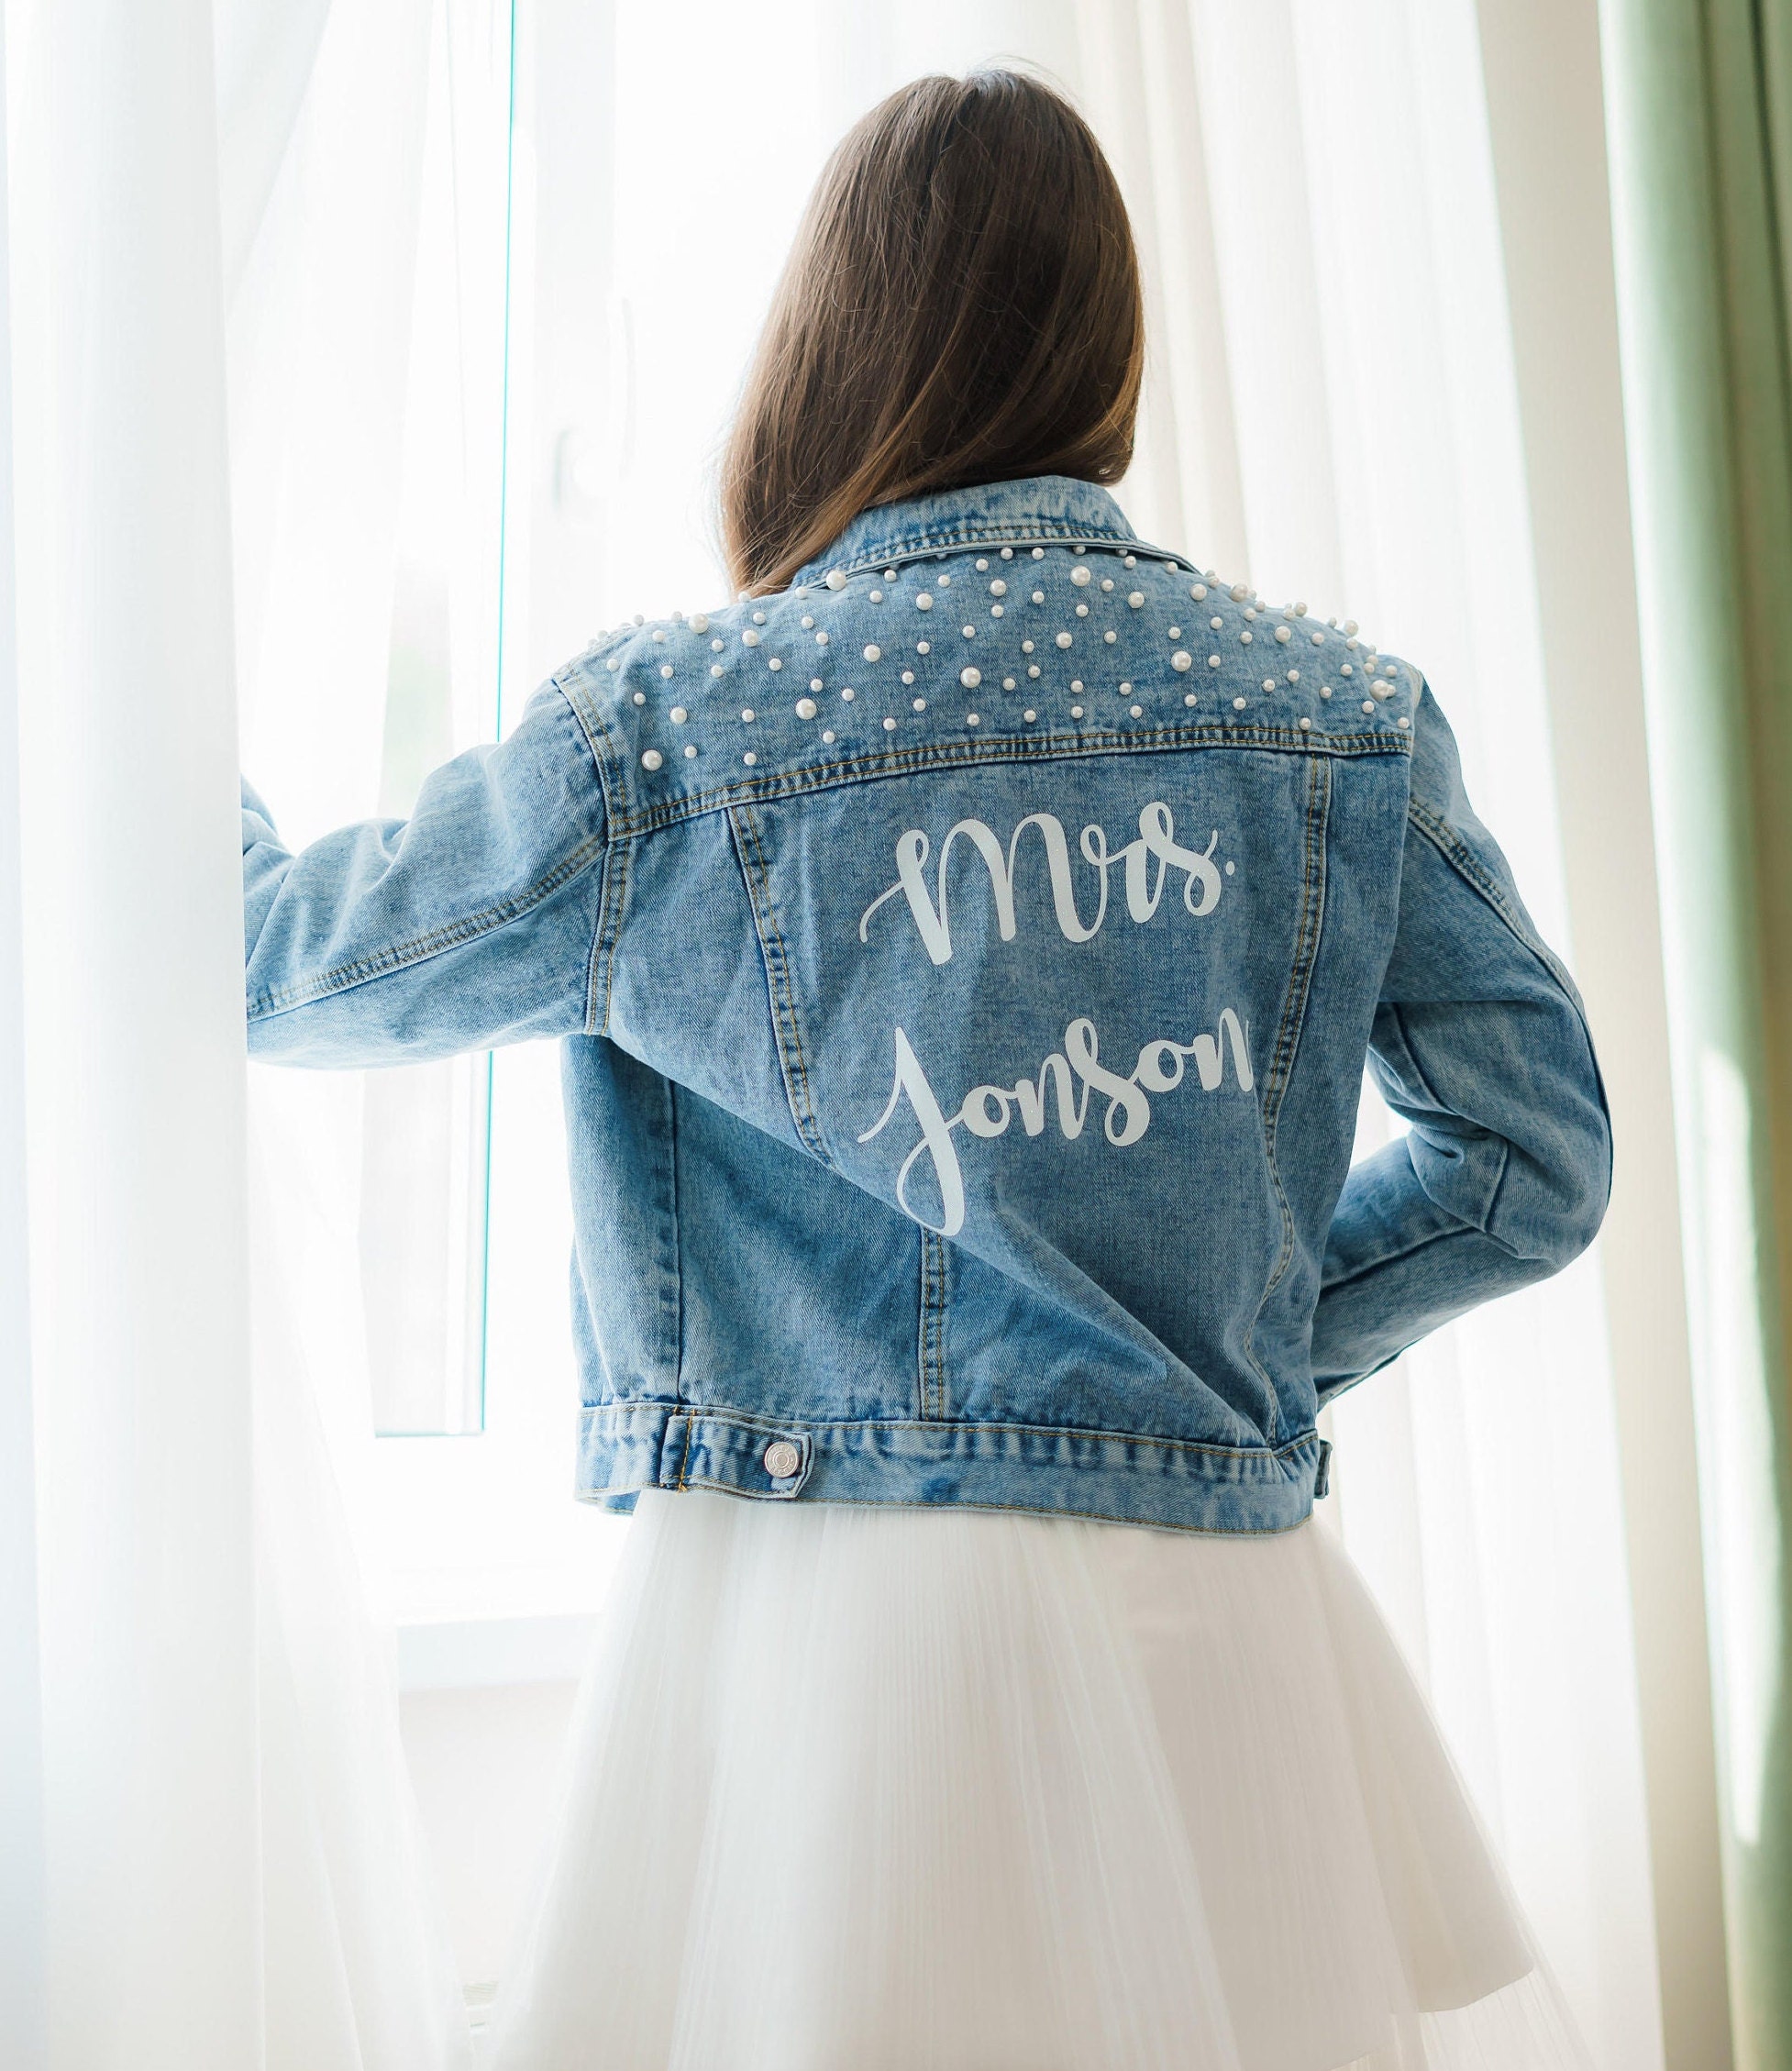 Wedding Jackets, Mr and Mrs Denim Jacket, Custom Jean Jackets for Couple,  Groom and Bride Gift, Wedding Date Under Collar Jacket, Pearls Jac 